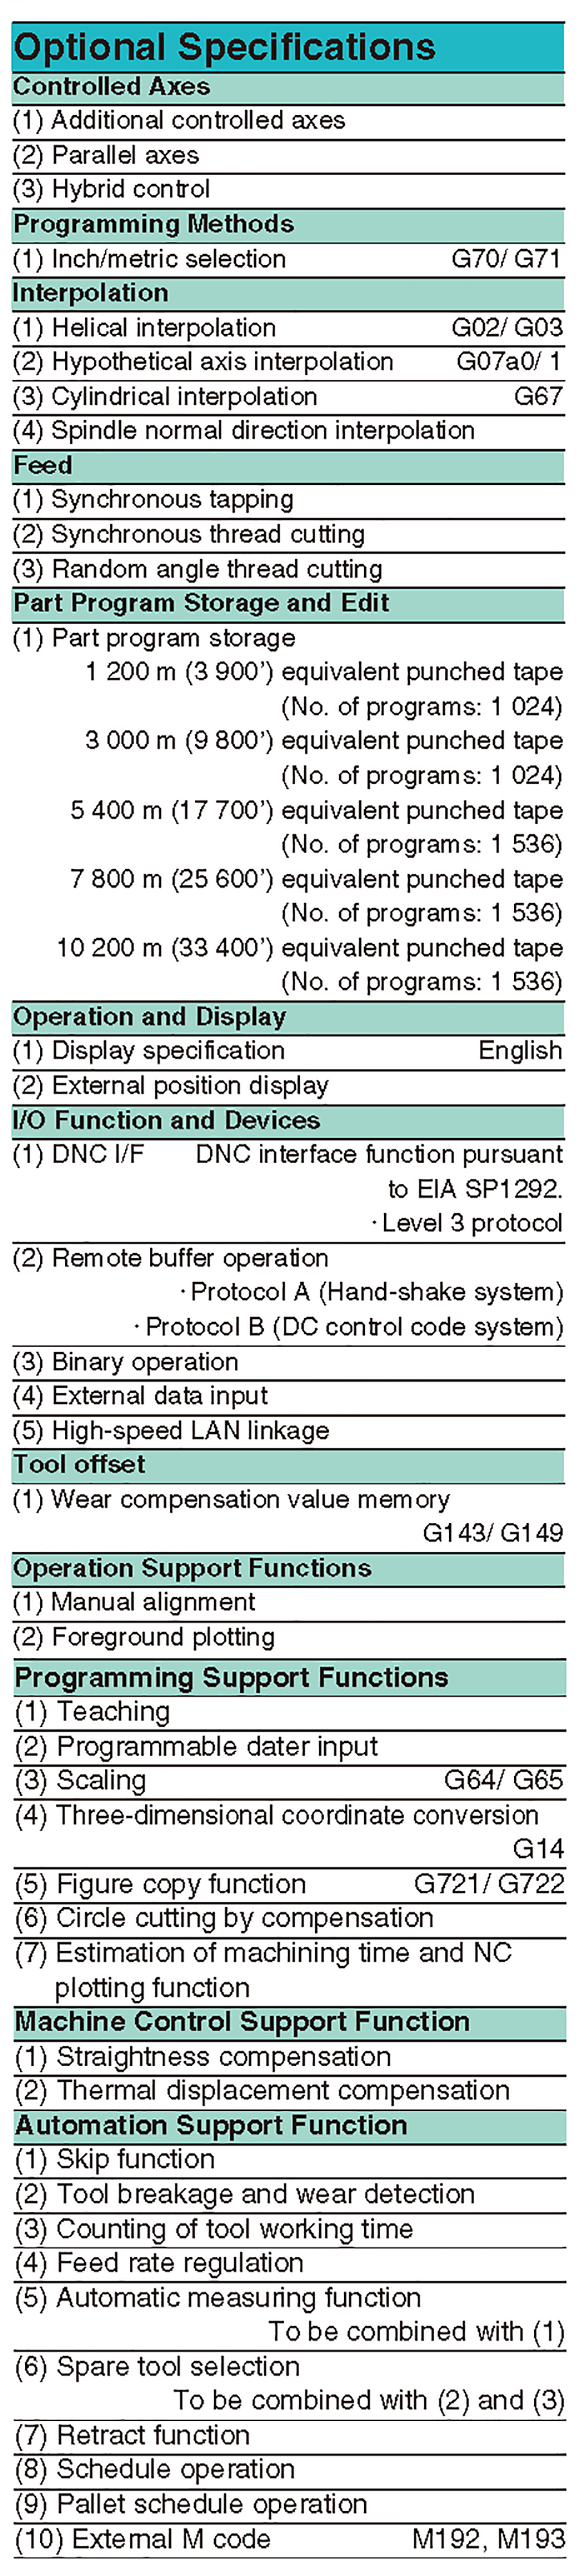 Optional Specifications